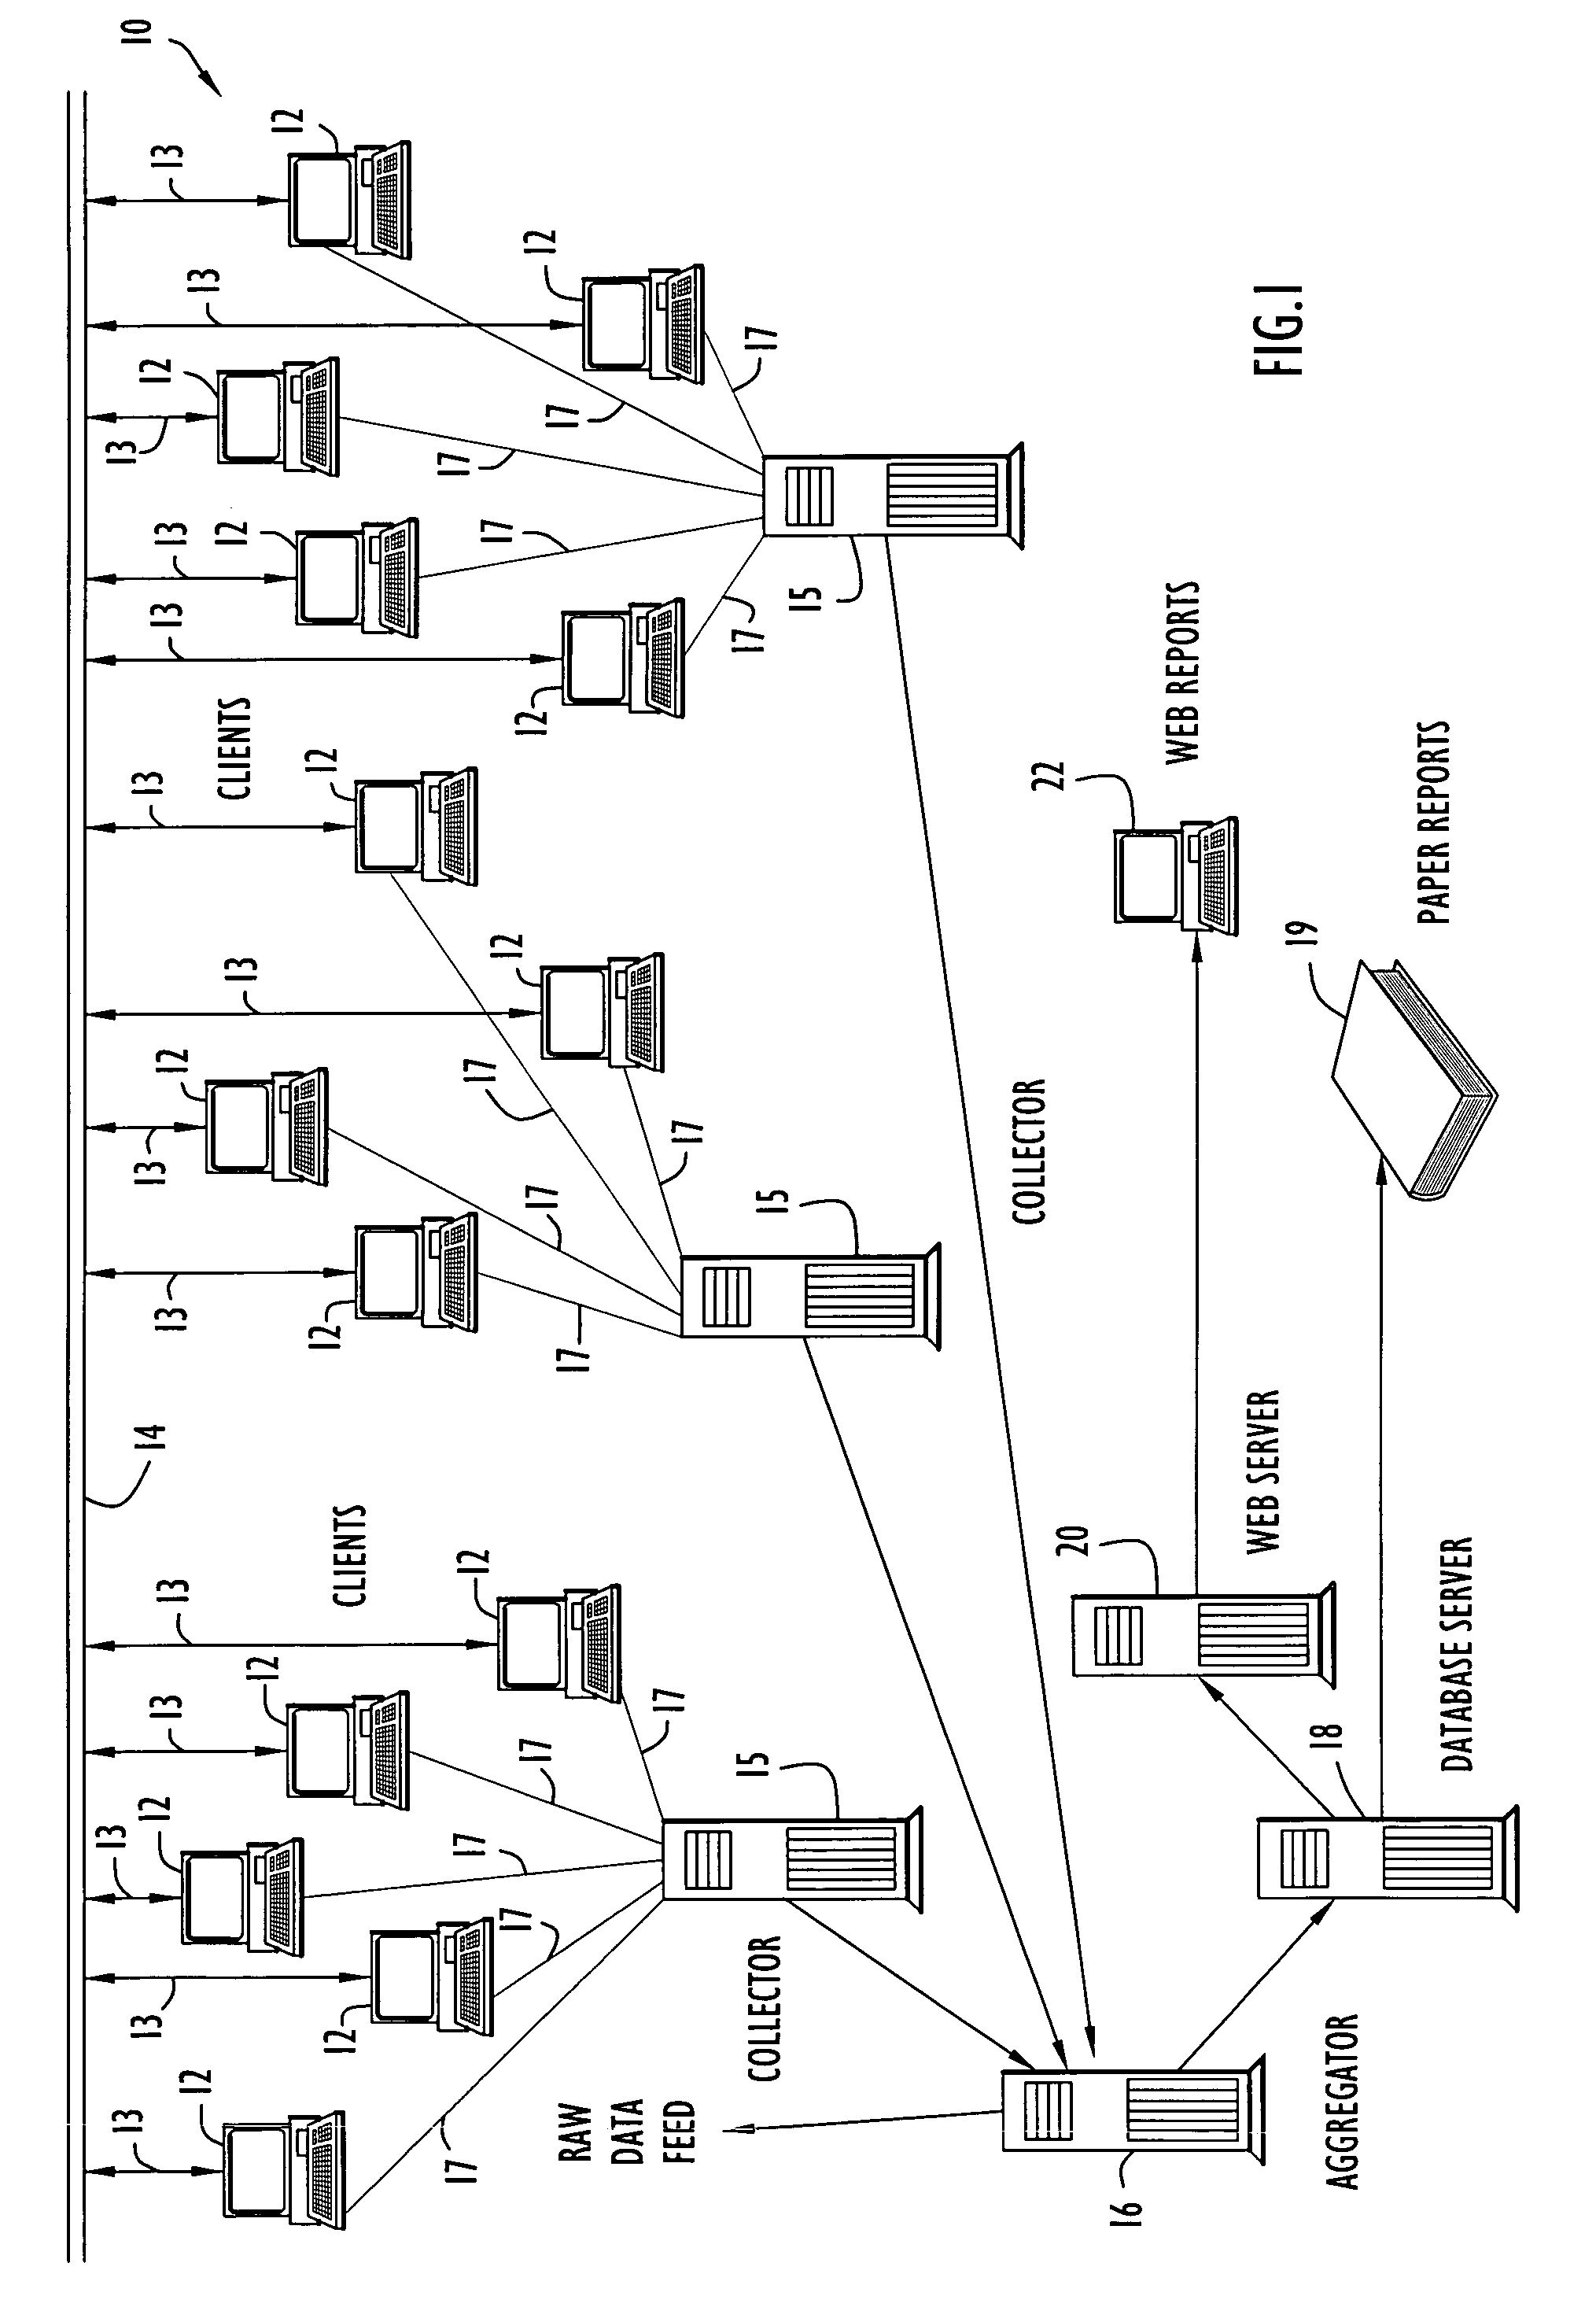 Methods and apparatus for monitoring end-user experience in a distributed network